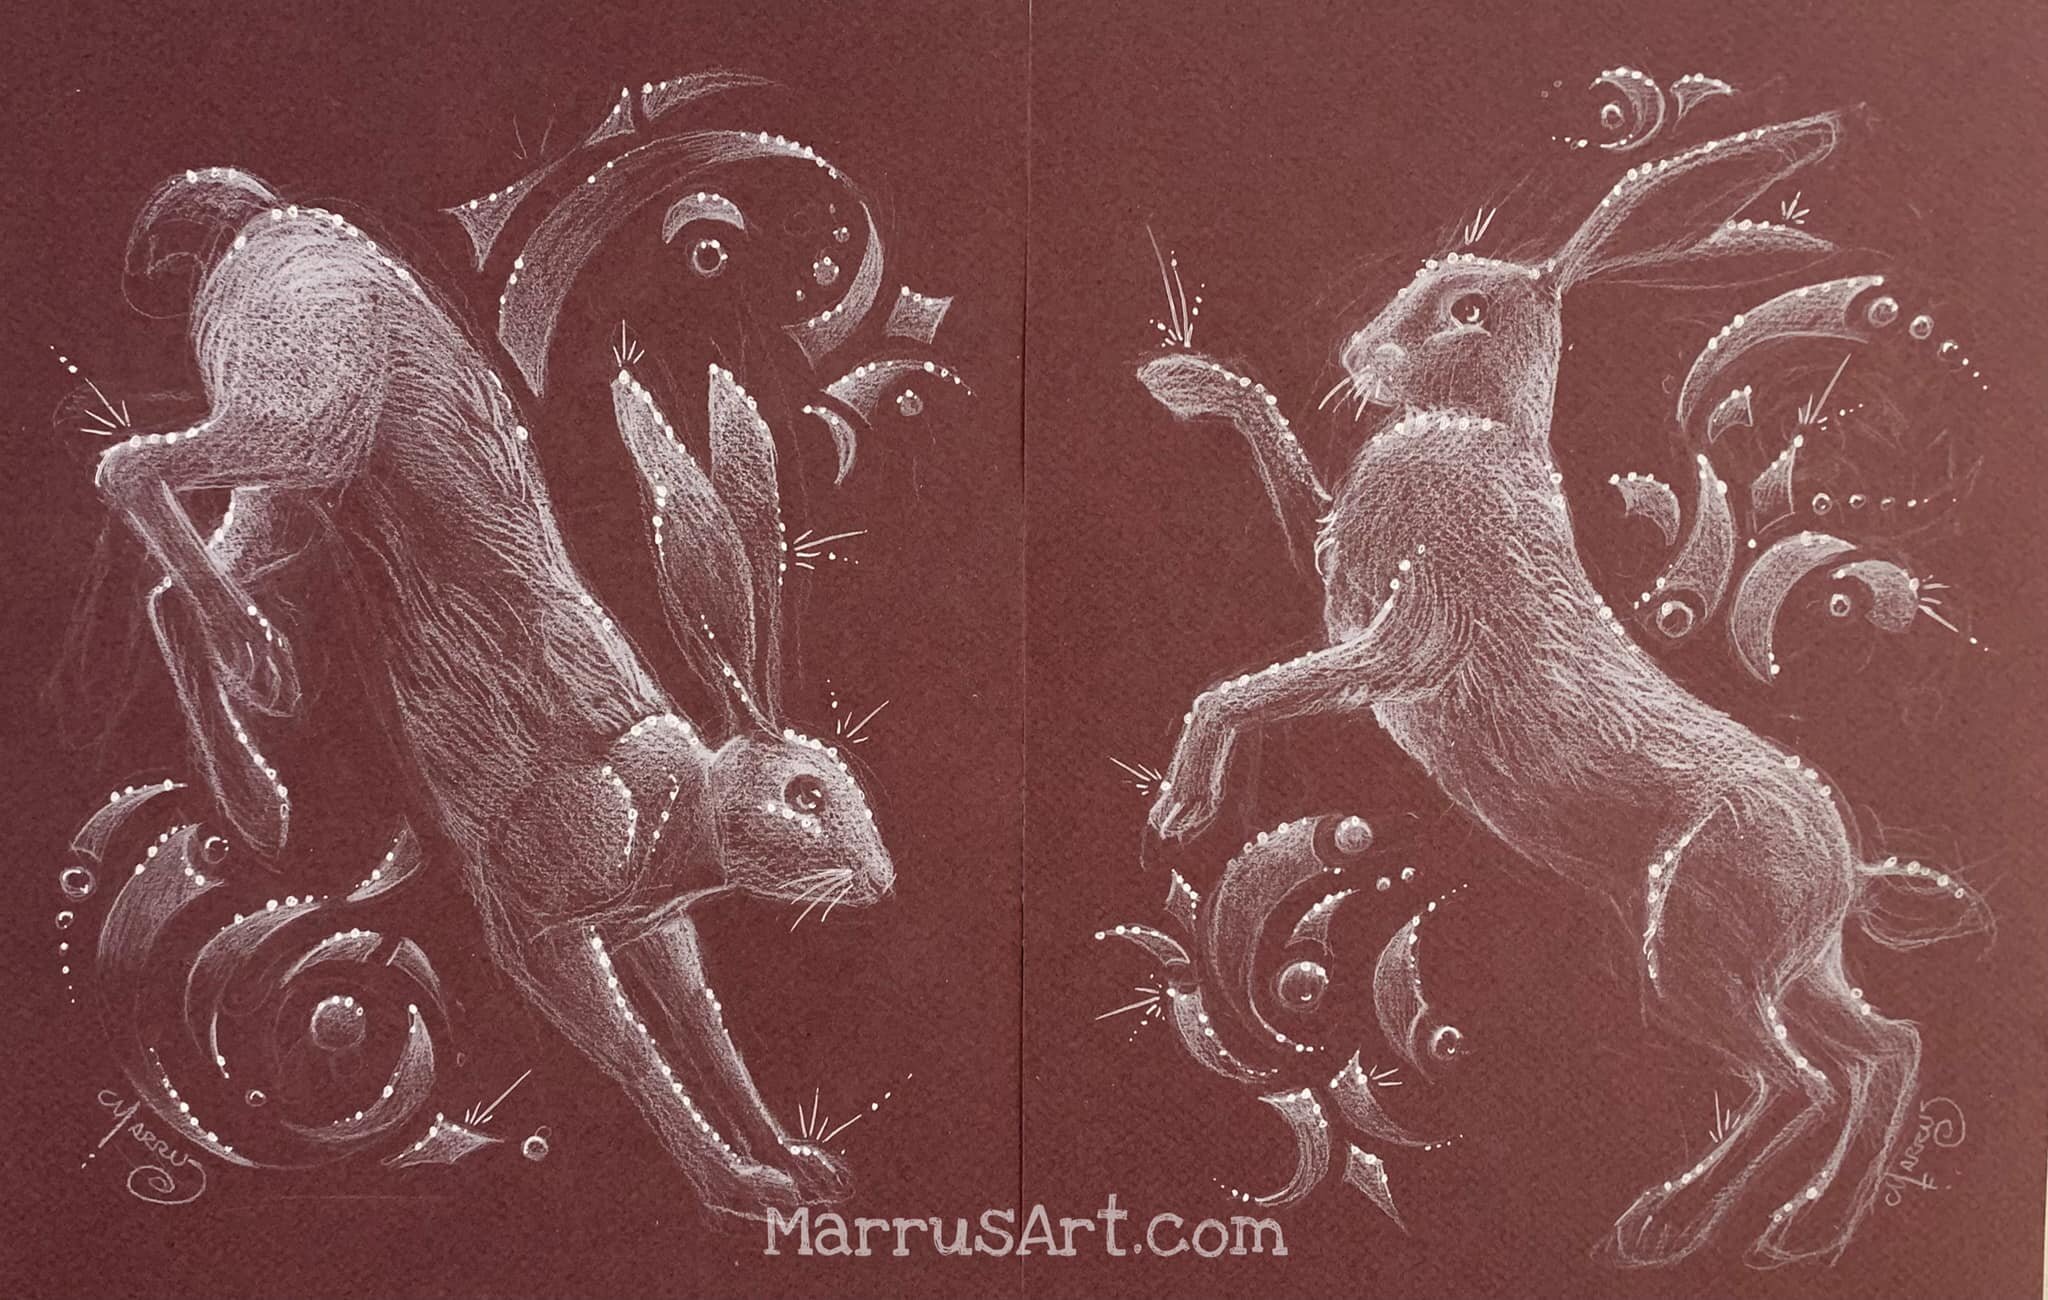 I drew these. They could be yours. They&rsquo;ll work individually, or as a set. Lemme know :-)￼￼ #Bunny #JackRabbits #DrawingsOfBunnies #NightDoodles #AnimalArt #Sparkly #Diptych #TwoGreatTastesThatTasteGreatTogether #NatureDrawings #rabbitdrawing